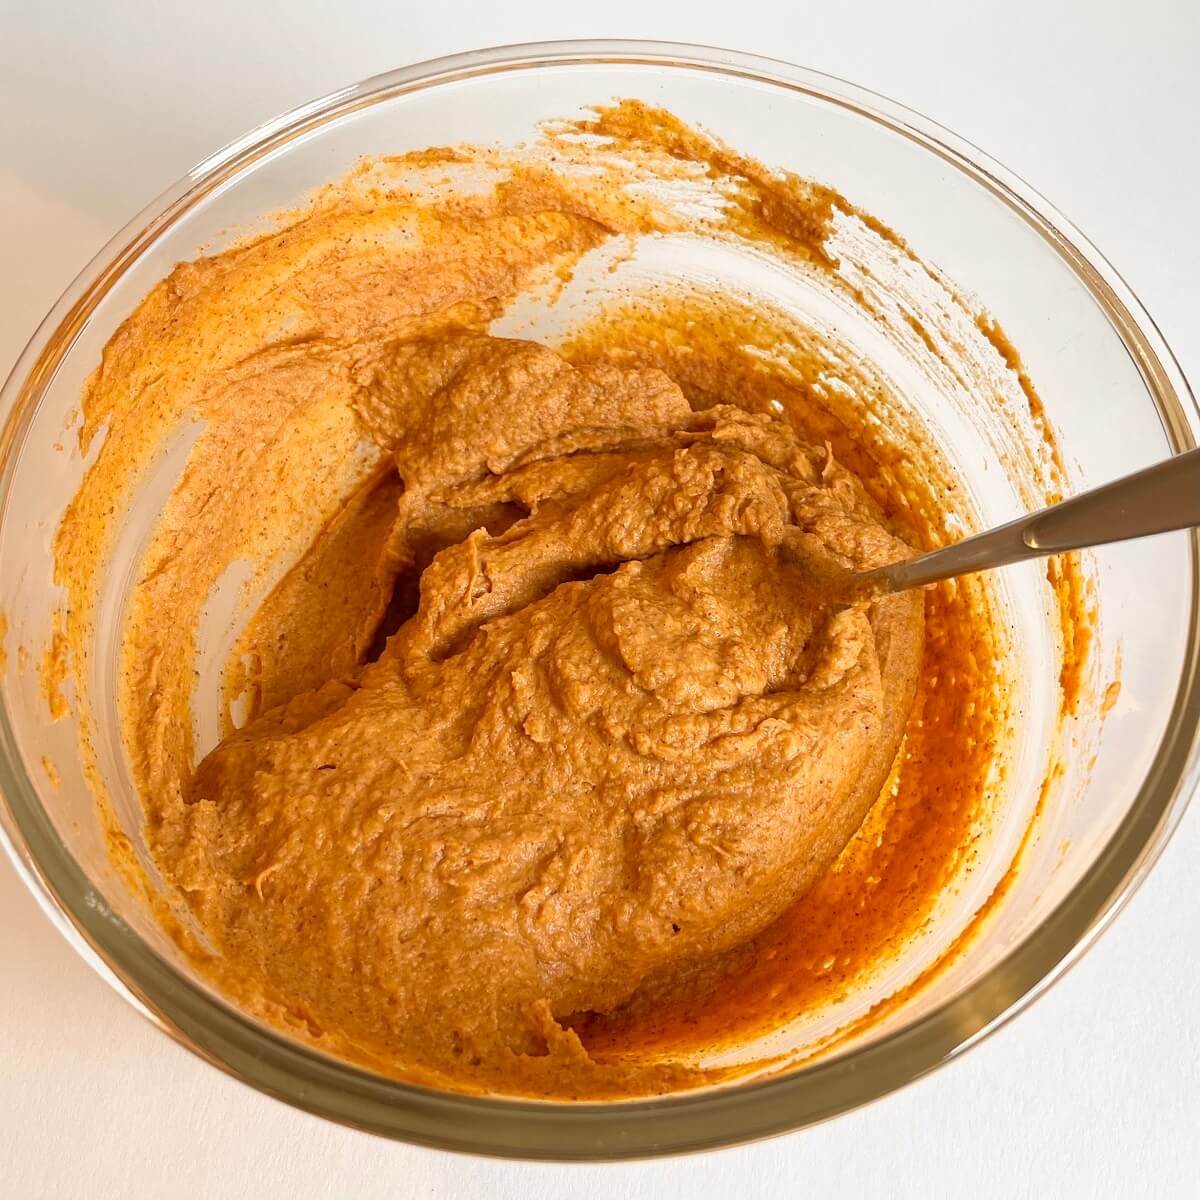 Pumpkin, almond butter, and vanilla extract stirred in a glass mixing bowl.